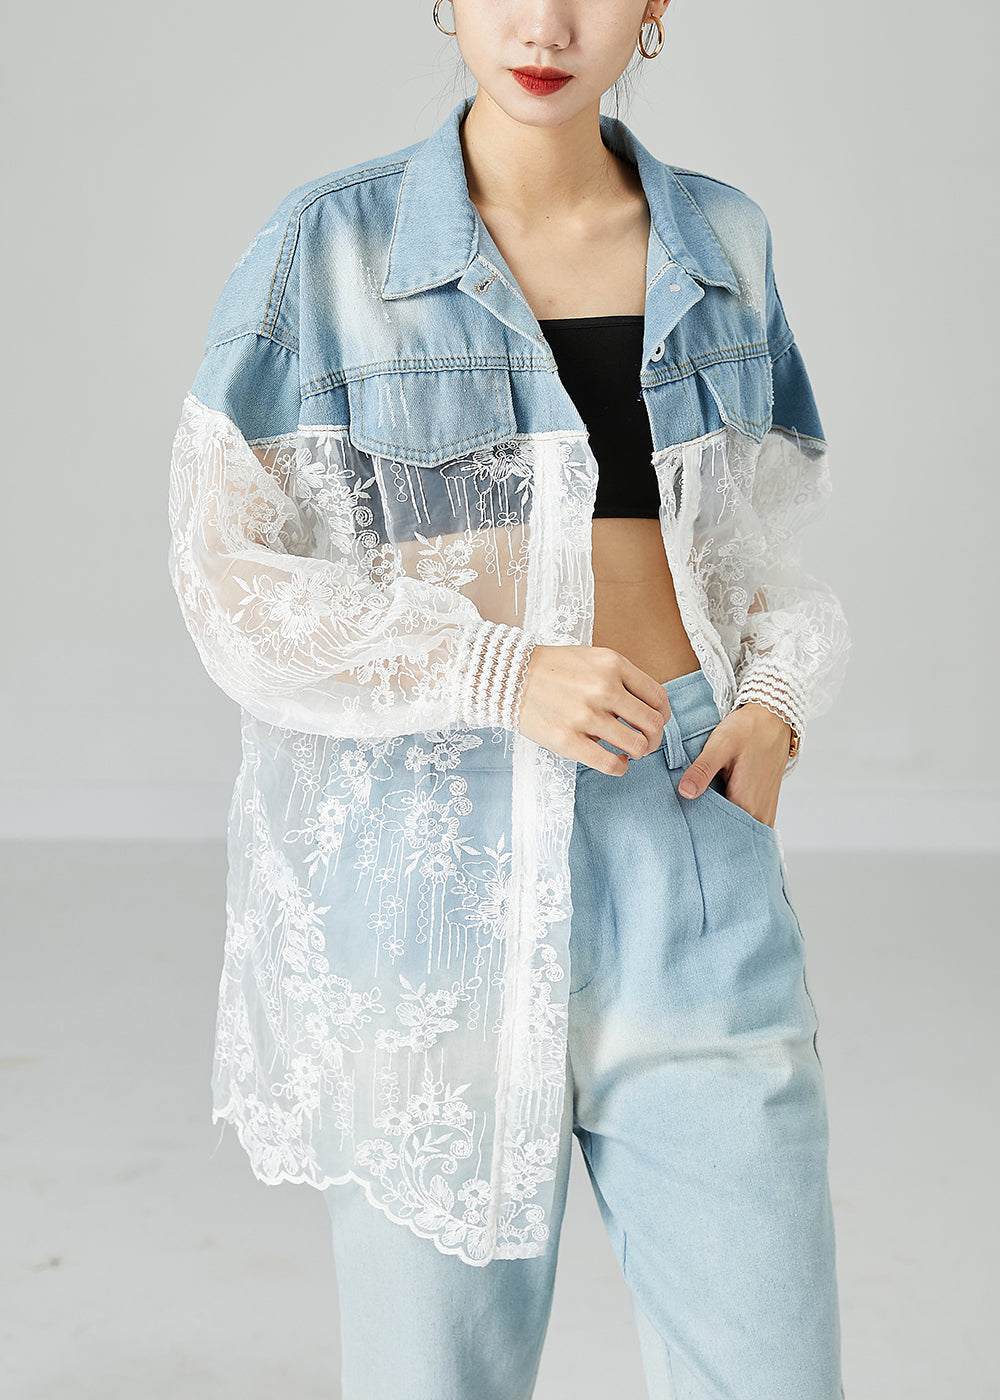 Classy Colorblock Embroideried Patchwork Hollow Out Denim Coat Outwear Summer LY2429 - fabuloryshop